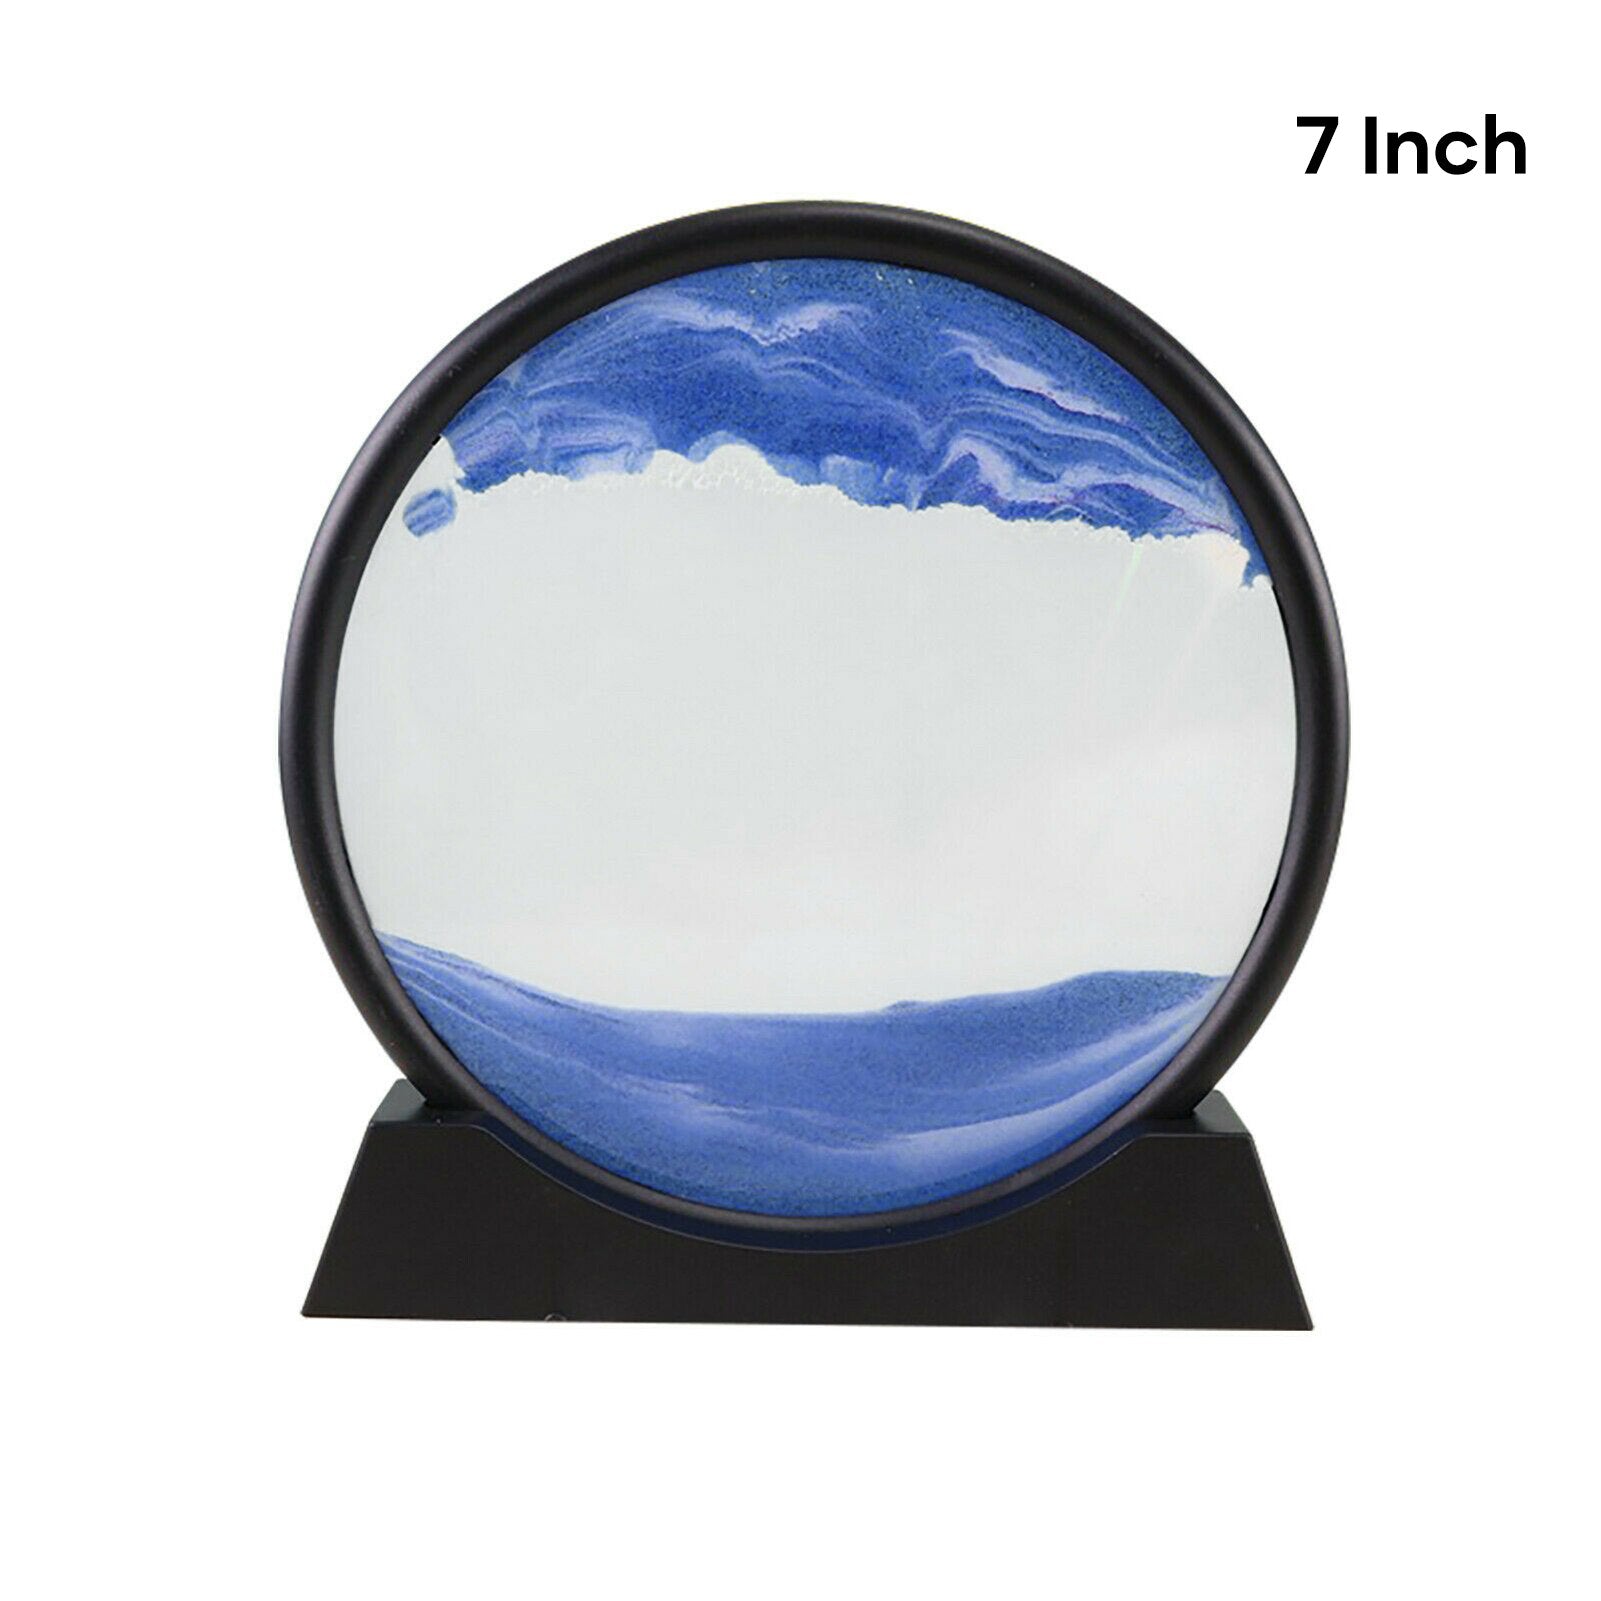 Moving Sand Art Picture Round Glass 3D Natural Landscape Flowing Sand Frame Hourglasses Decor For Home SP99